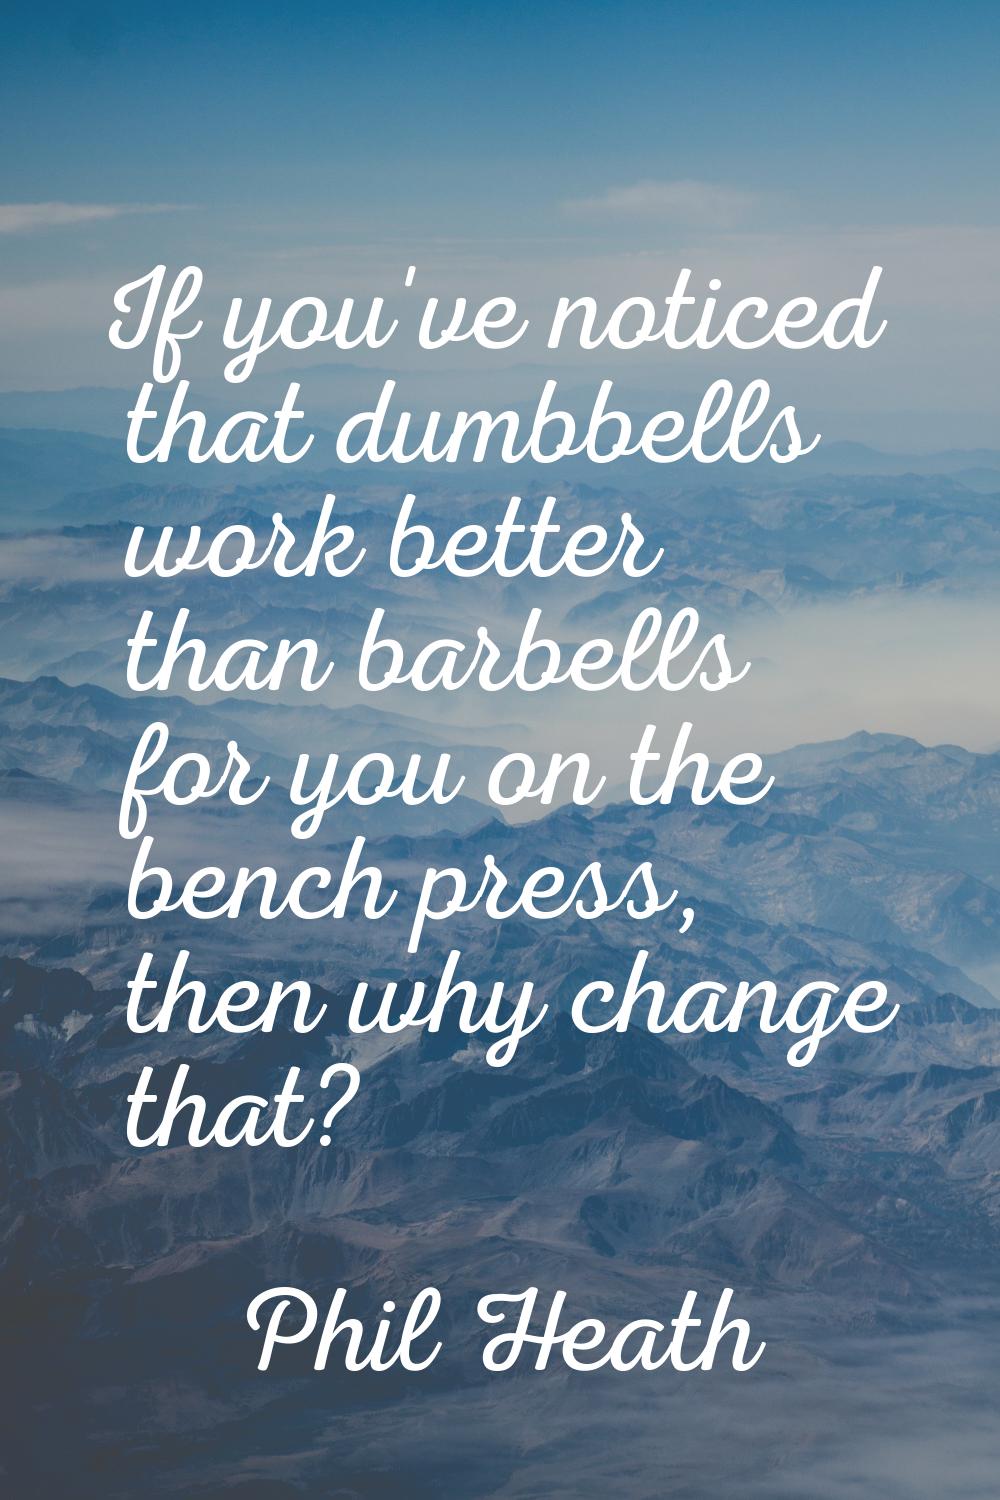 If you've noticed that dumbbells work better than barbells for you on the bench press, then why cha